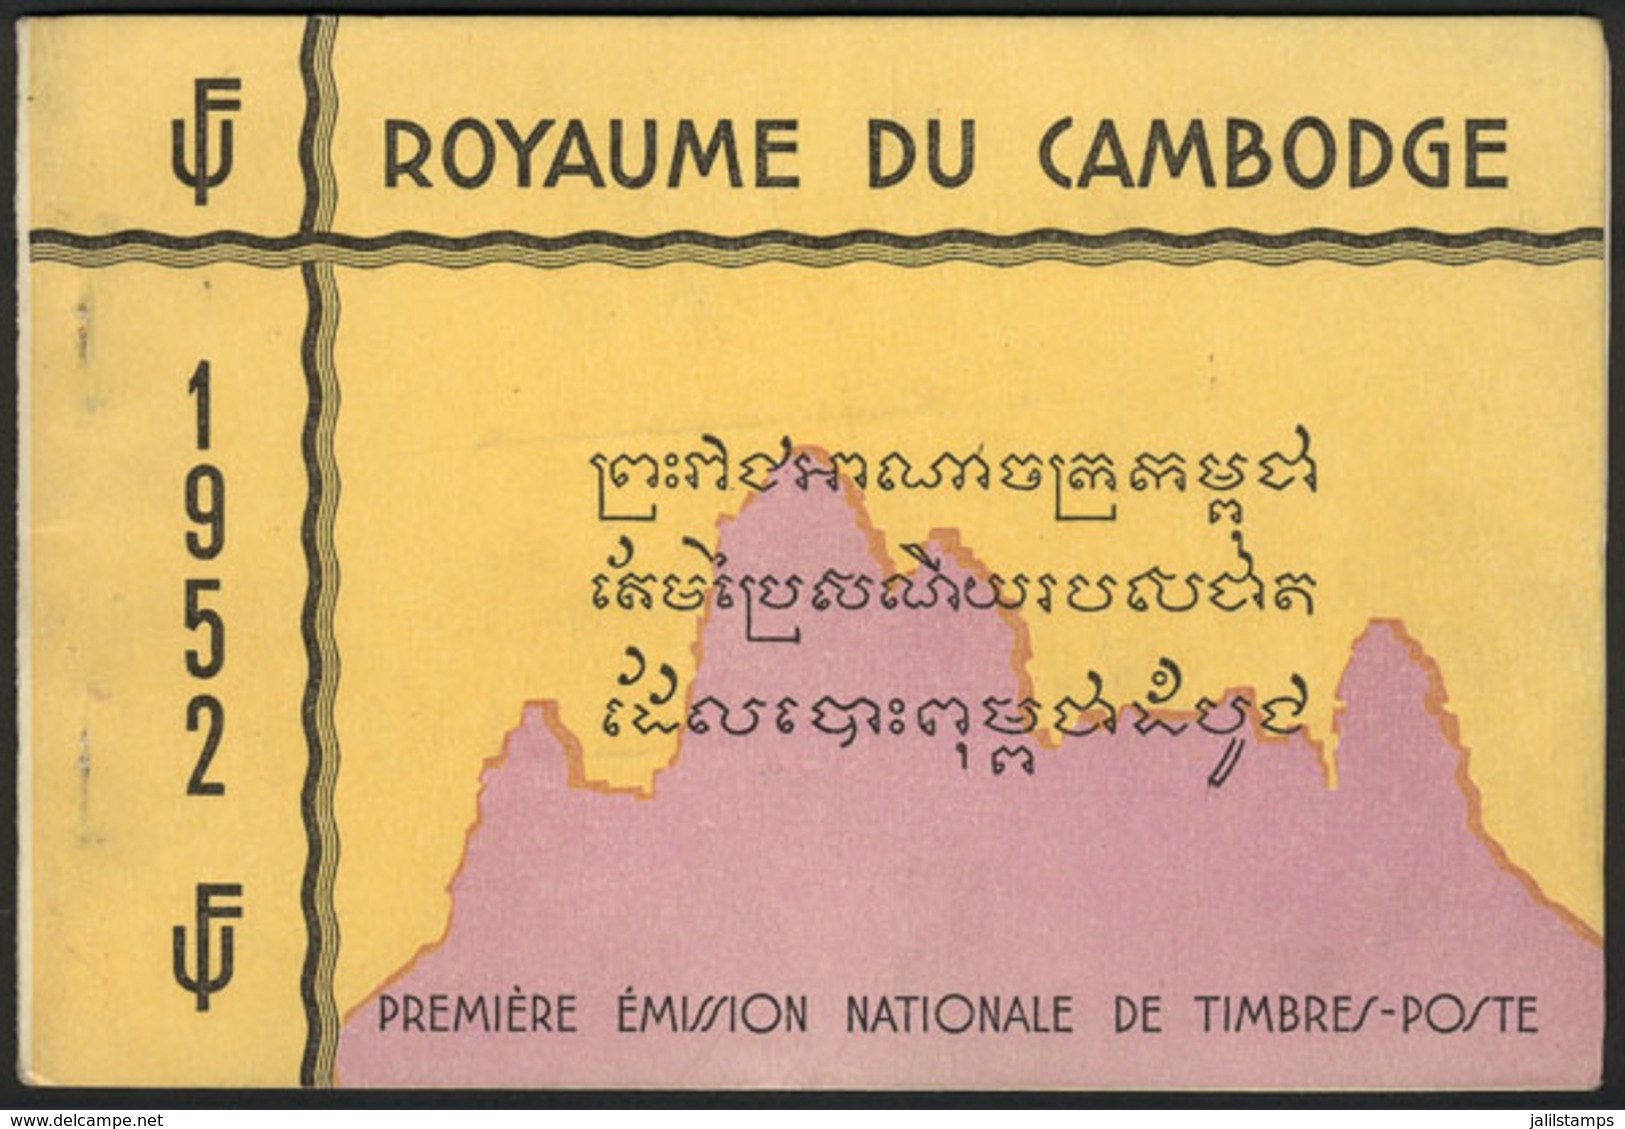 CAMBODIA: Booklet Of 1952 Containing Souvenir Sheets Sc.15a, 16a And 17a, Mint, But The Translucent Pages Are Glu - Kambodscha